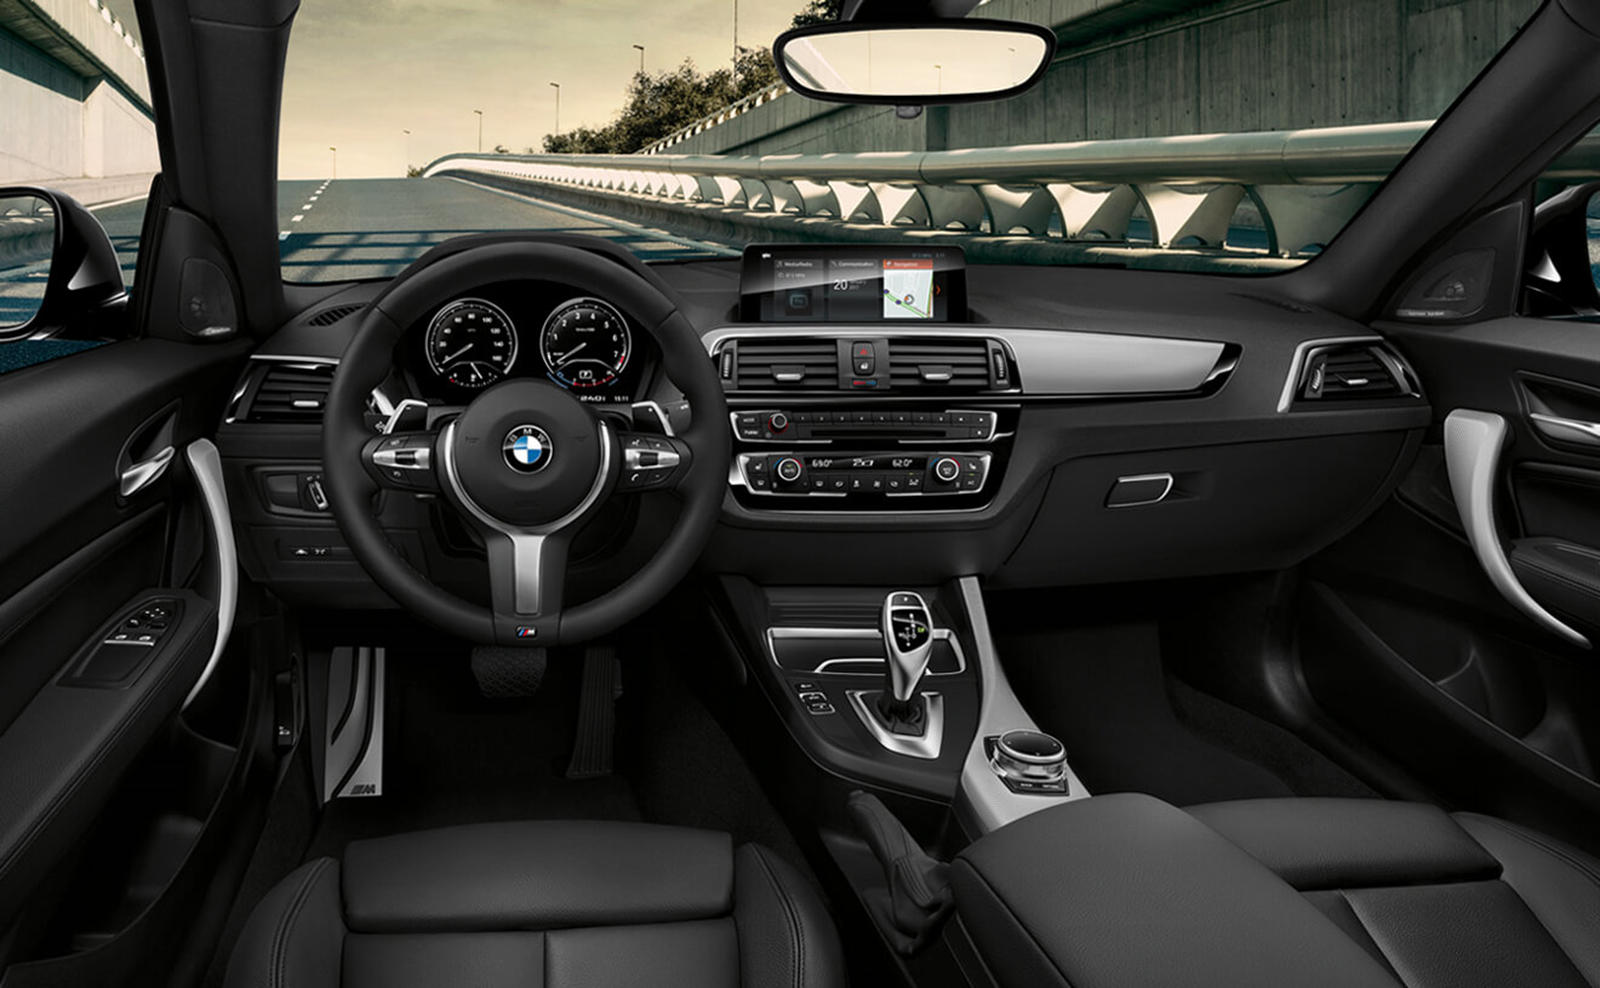 2019 BMW 2 Series Coupe Dashboard